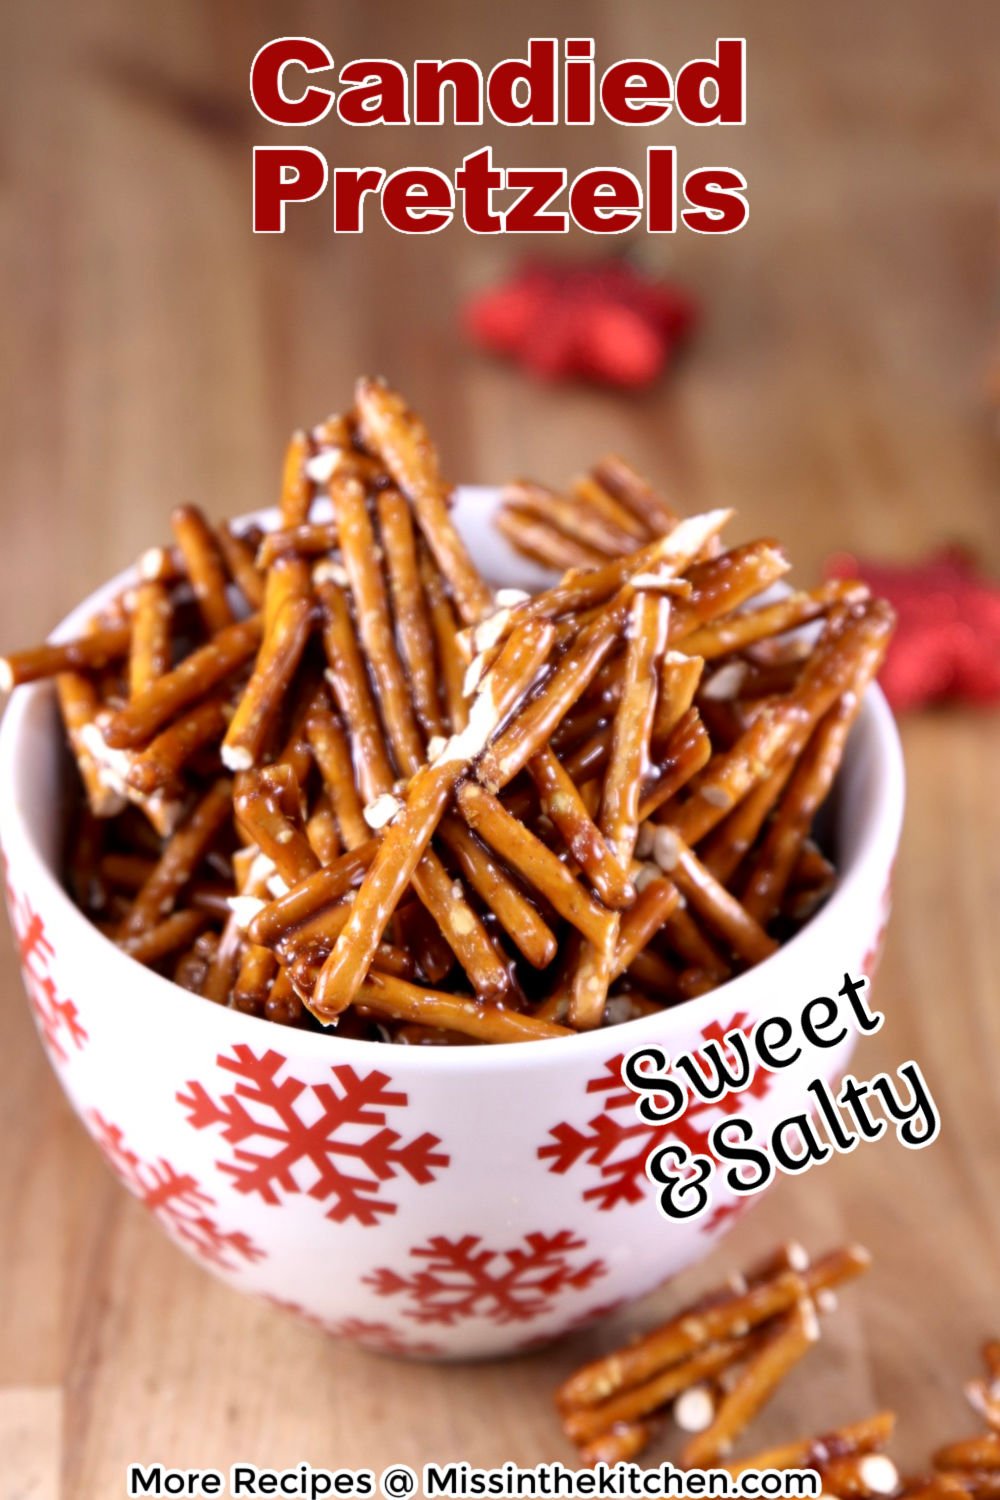 Candied Pretzels in a snowflake bowl